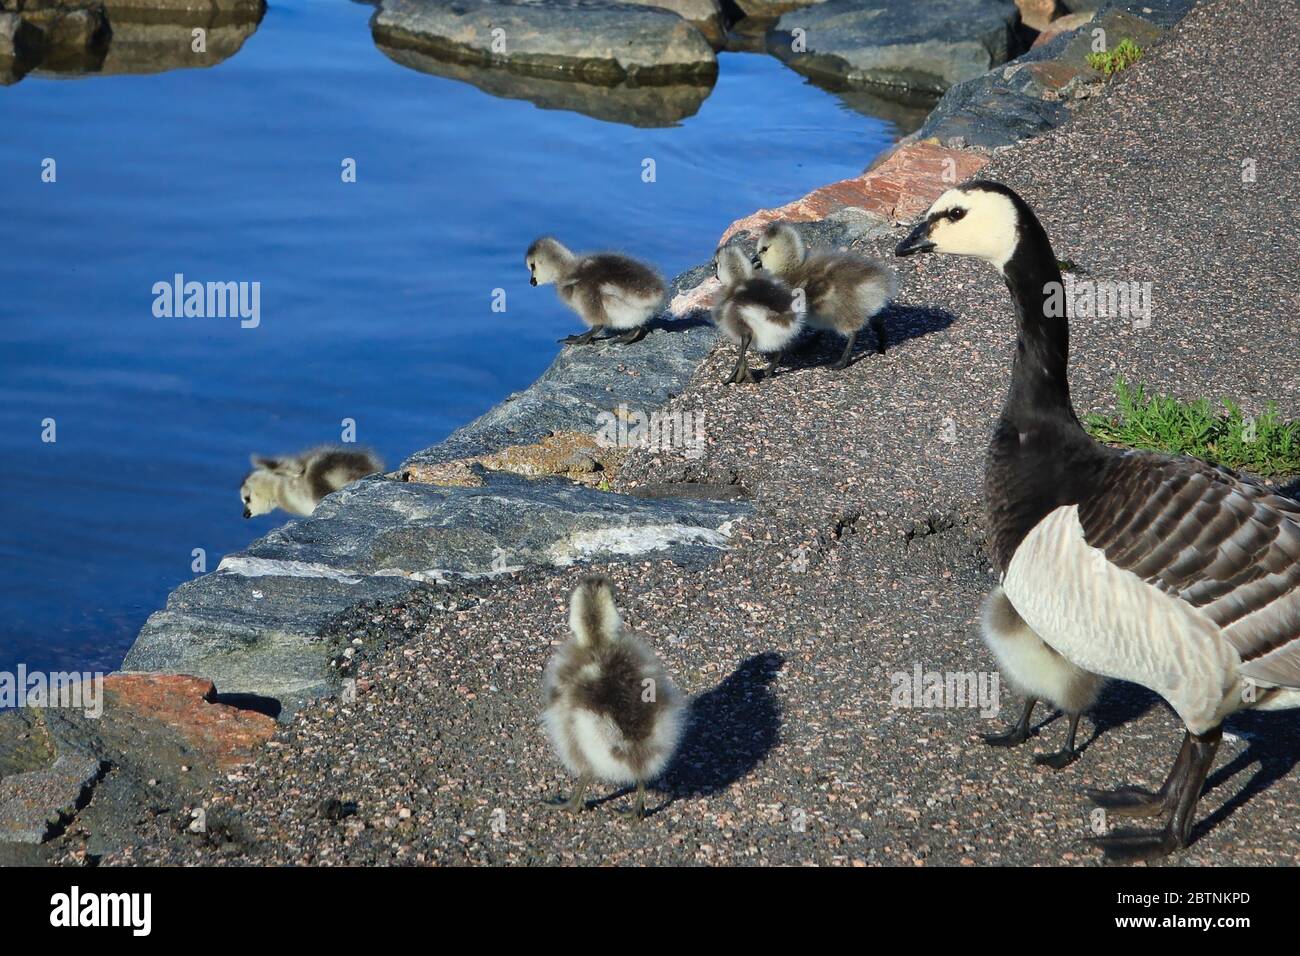 Adult Barnacle goose, Branta leucopsis, guiding  young fuzzy goslings to jump into the water. Helsinki, Finland. Stock Photo